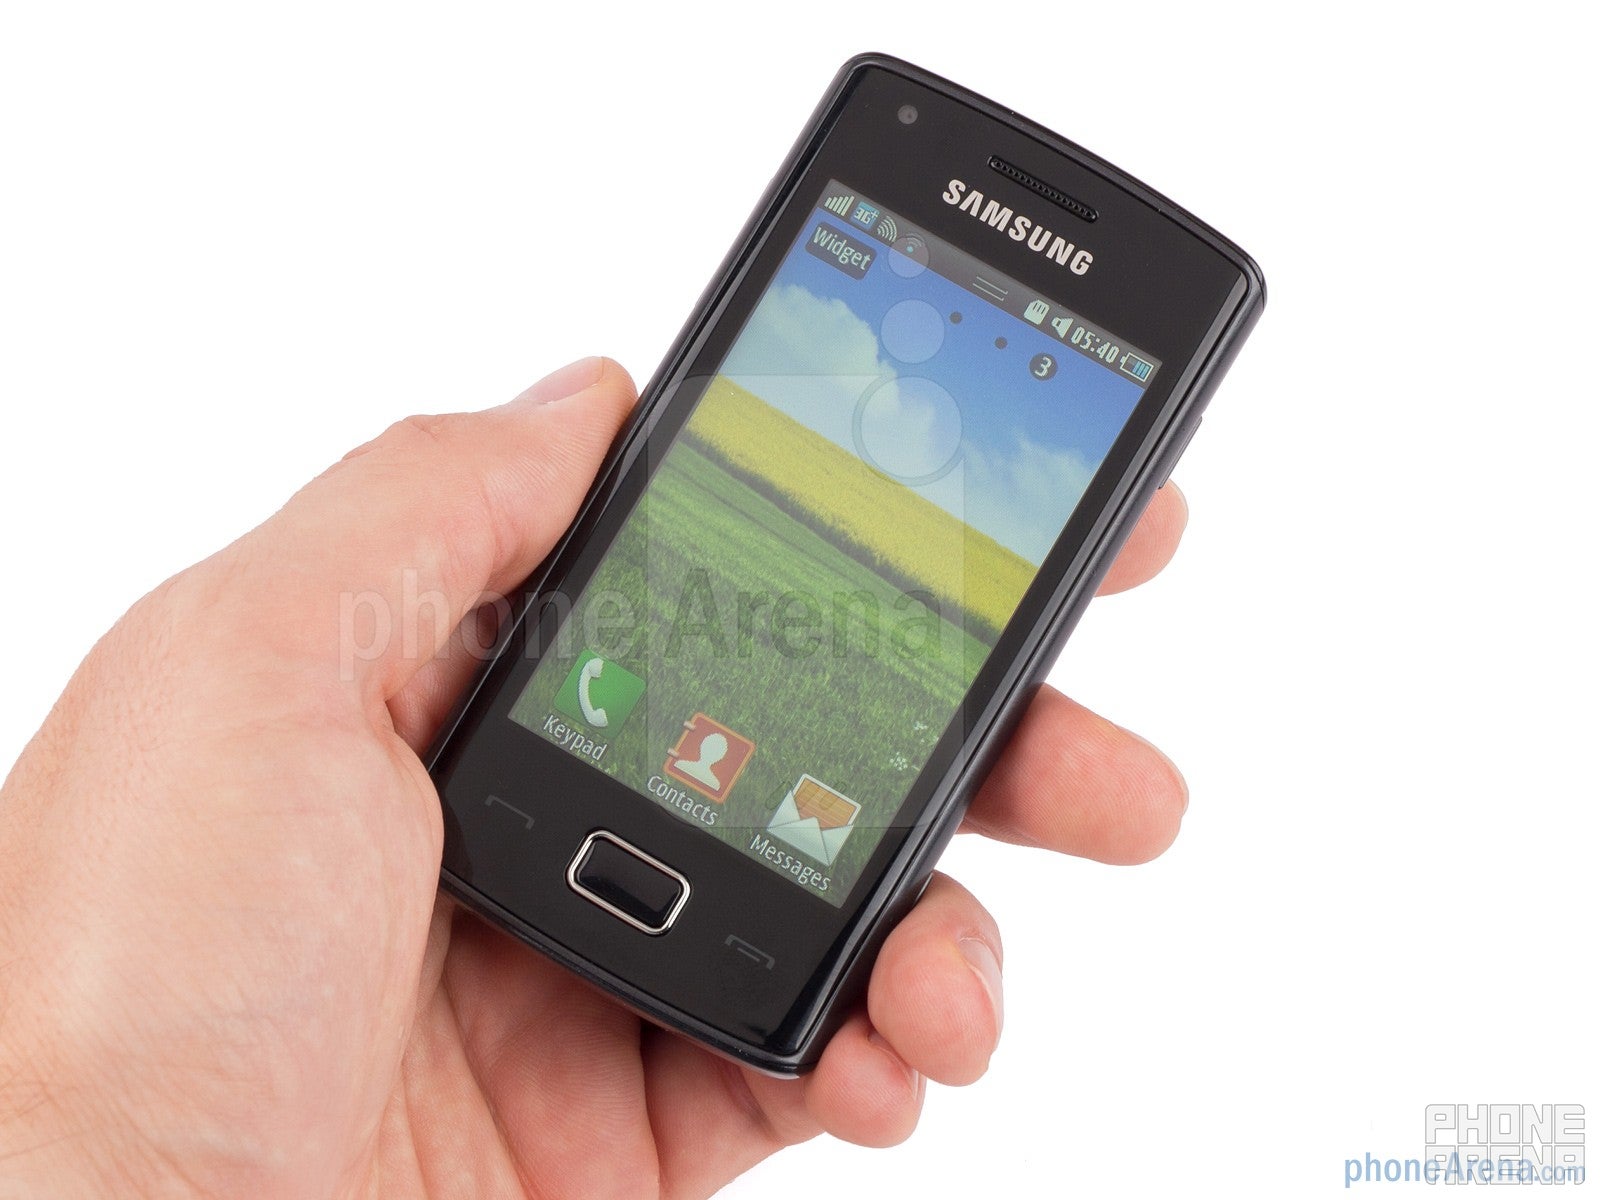 Samsung Wave 578 Review